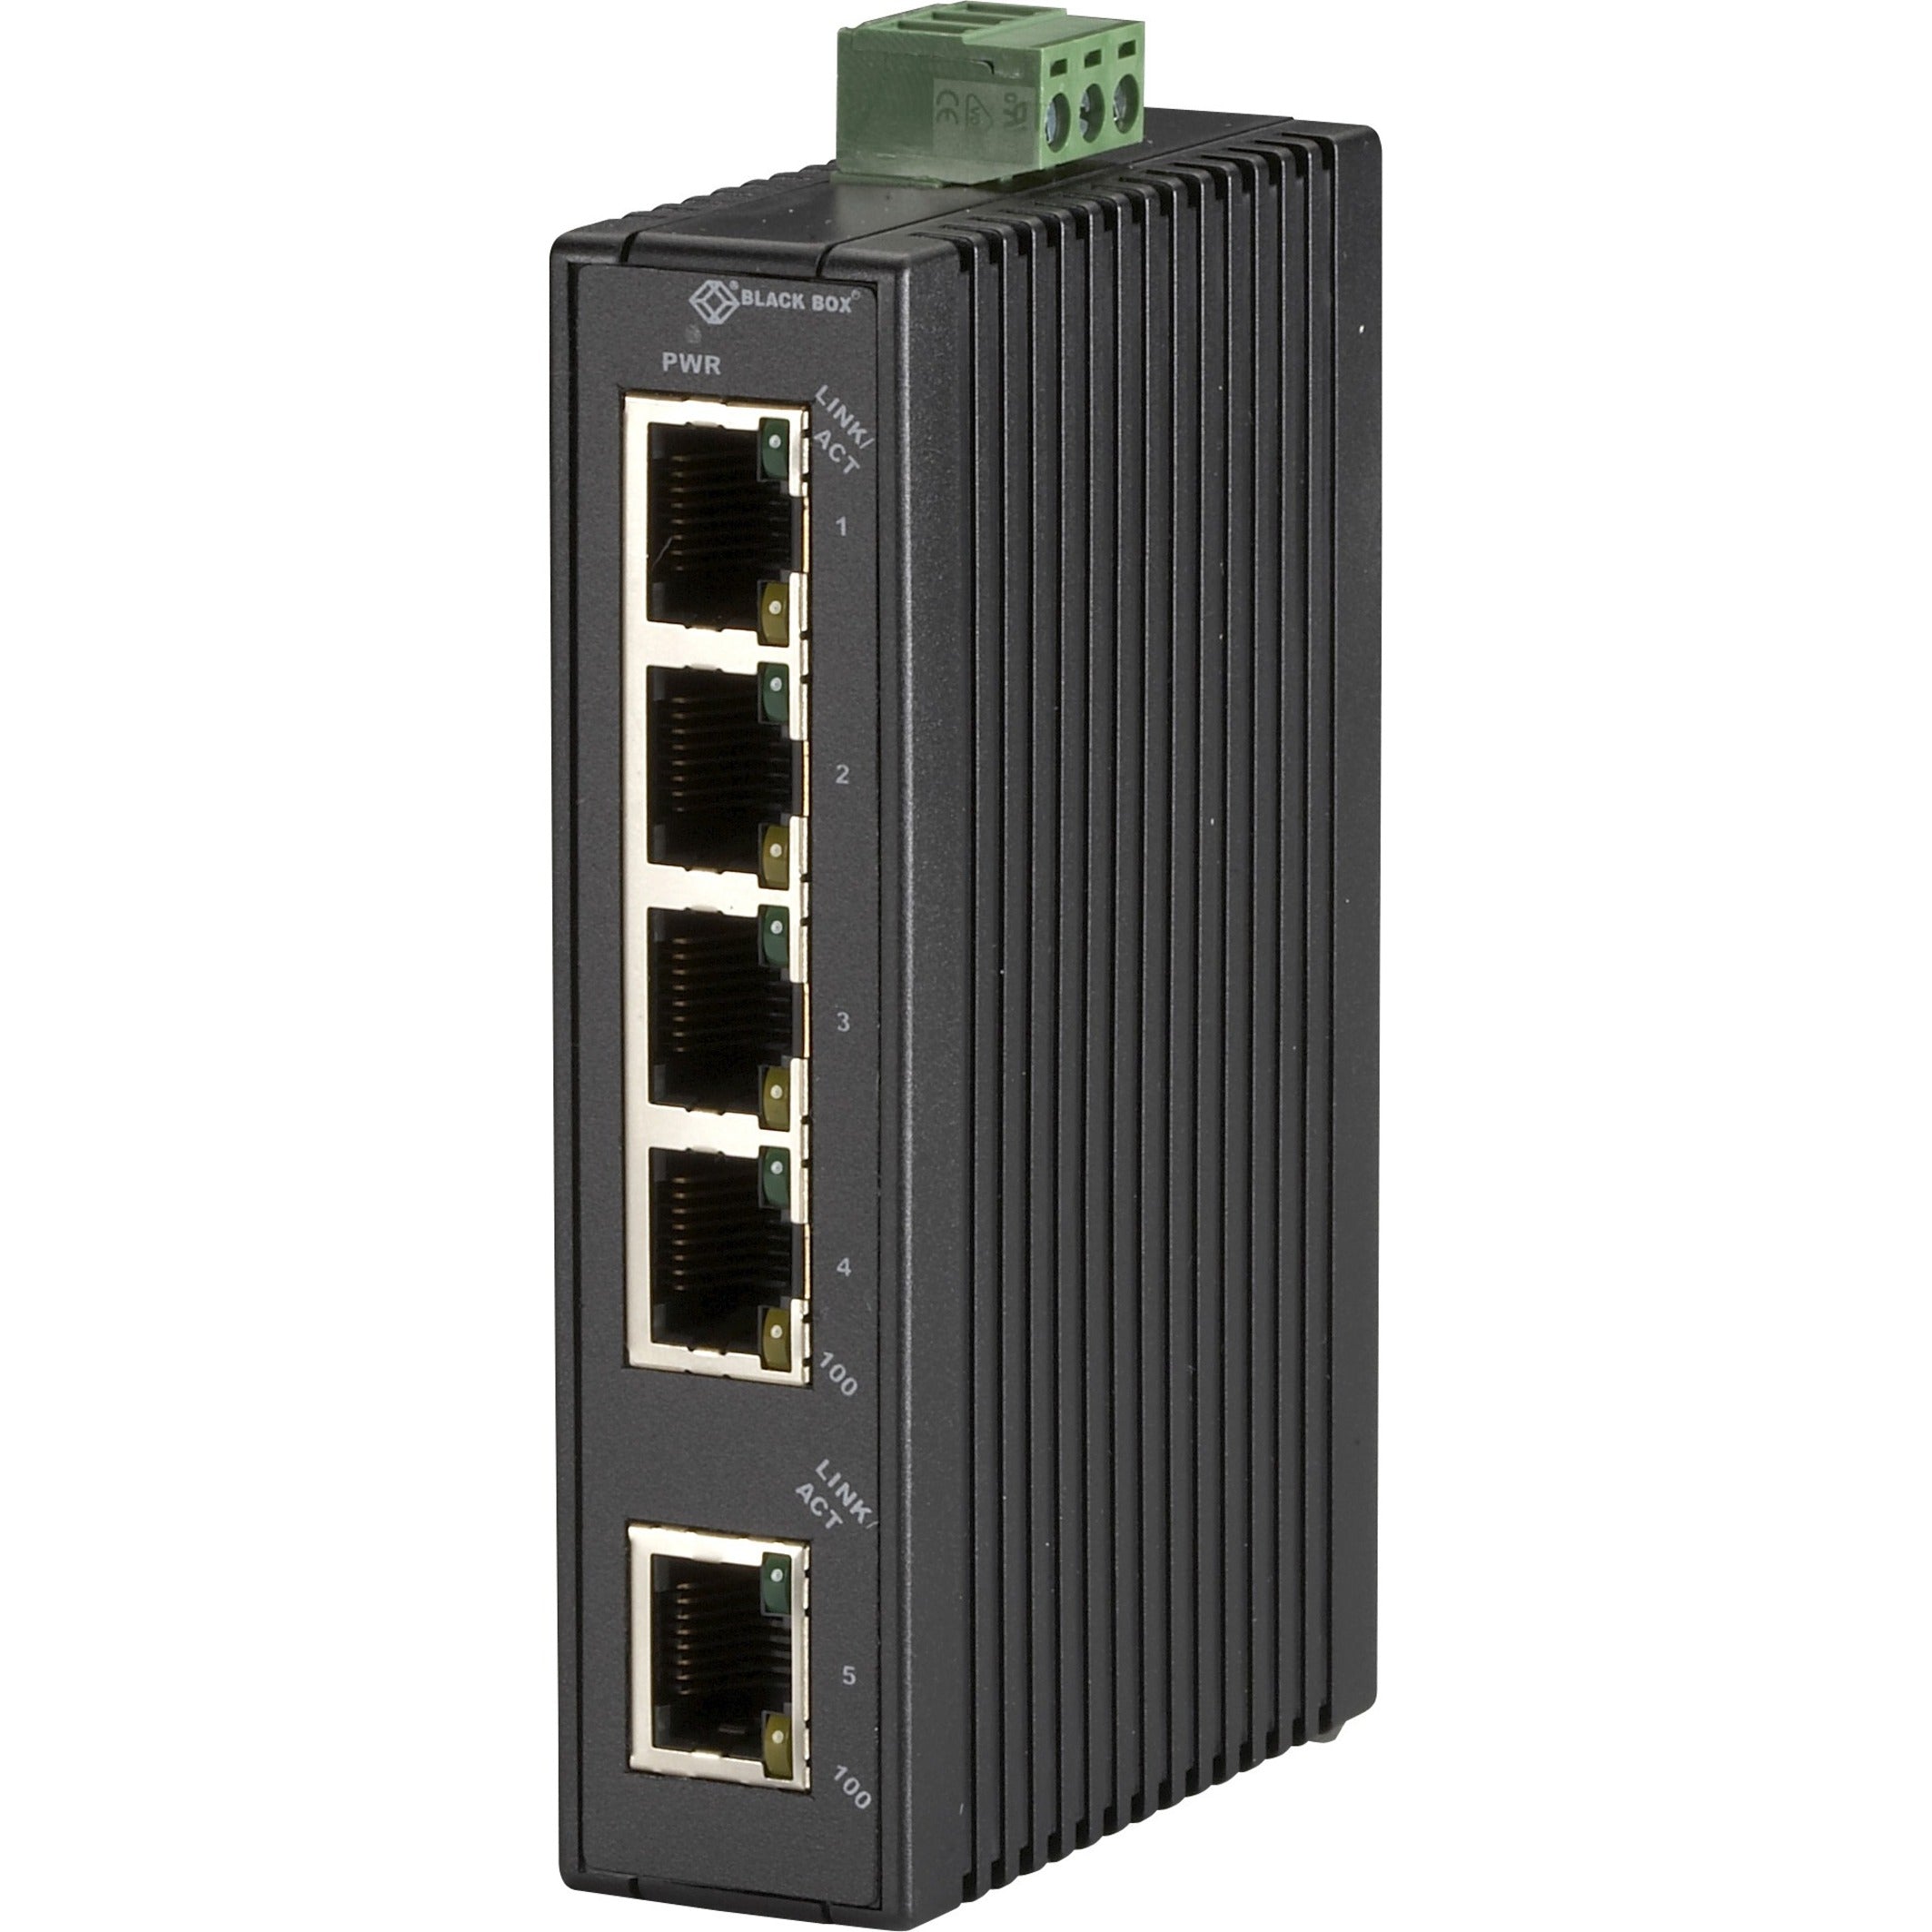 Black Box LBH120A-H Hardened Mini Industrial Switch, 5 x Fast Ethernet Network, TAA Compliant